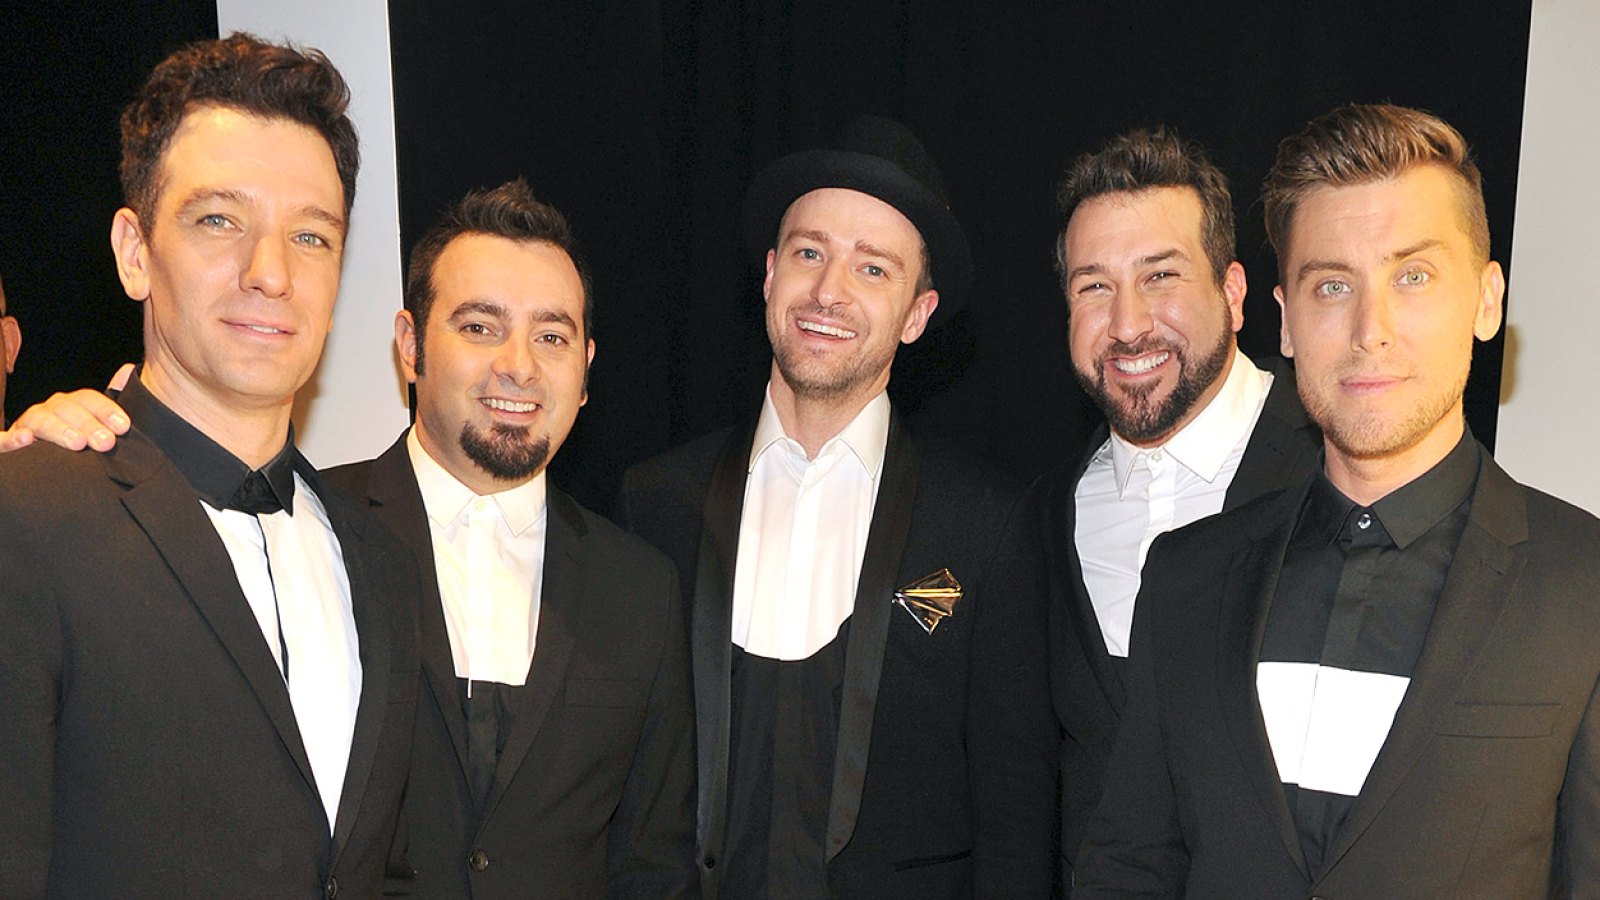 JC Chasez, Chris Kirkpatrick, Justin Timberlake, Joey Fatone and Lance Bass of N'Sync attends the 2013 MTV Video Music Awards at the Barclays Center on August 25, 2013 in the Brooklyn borough of New York City.